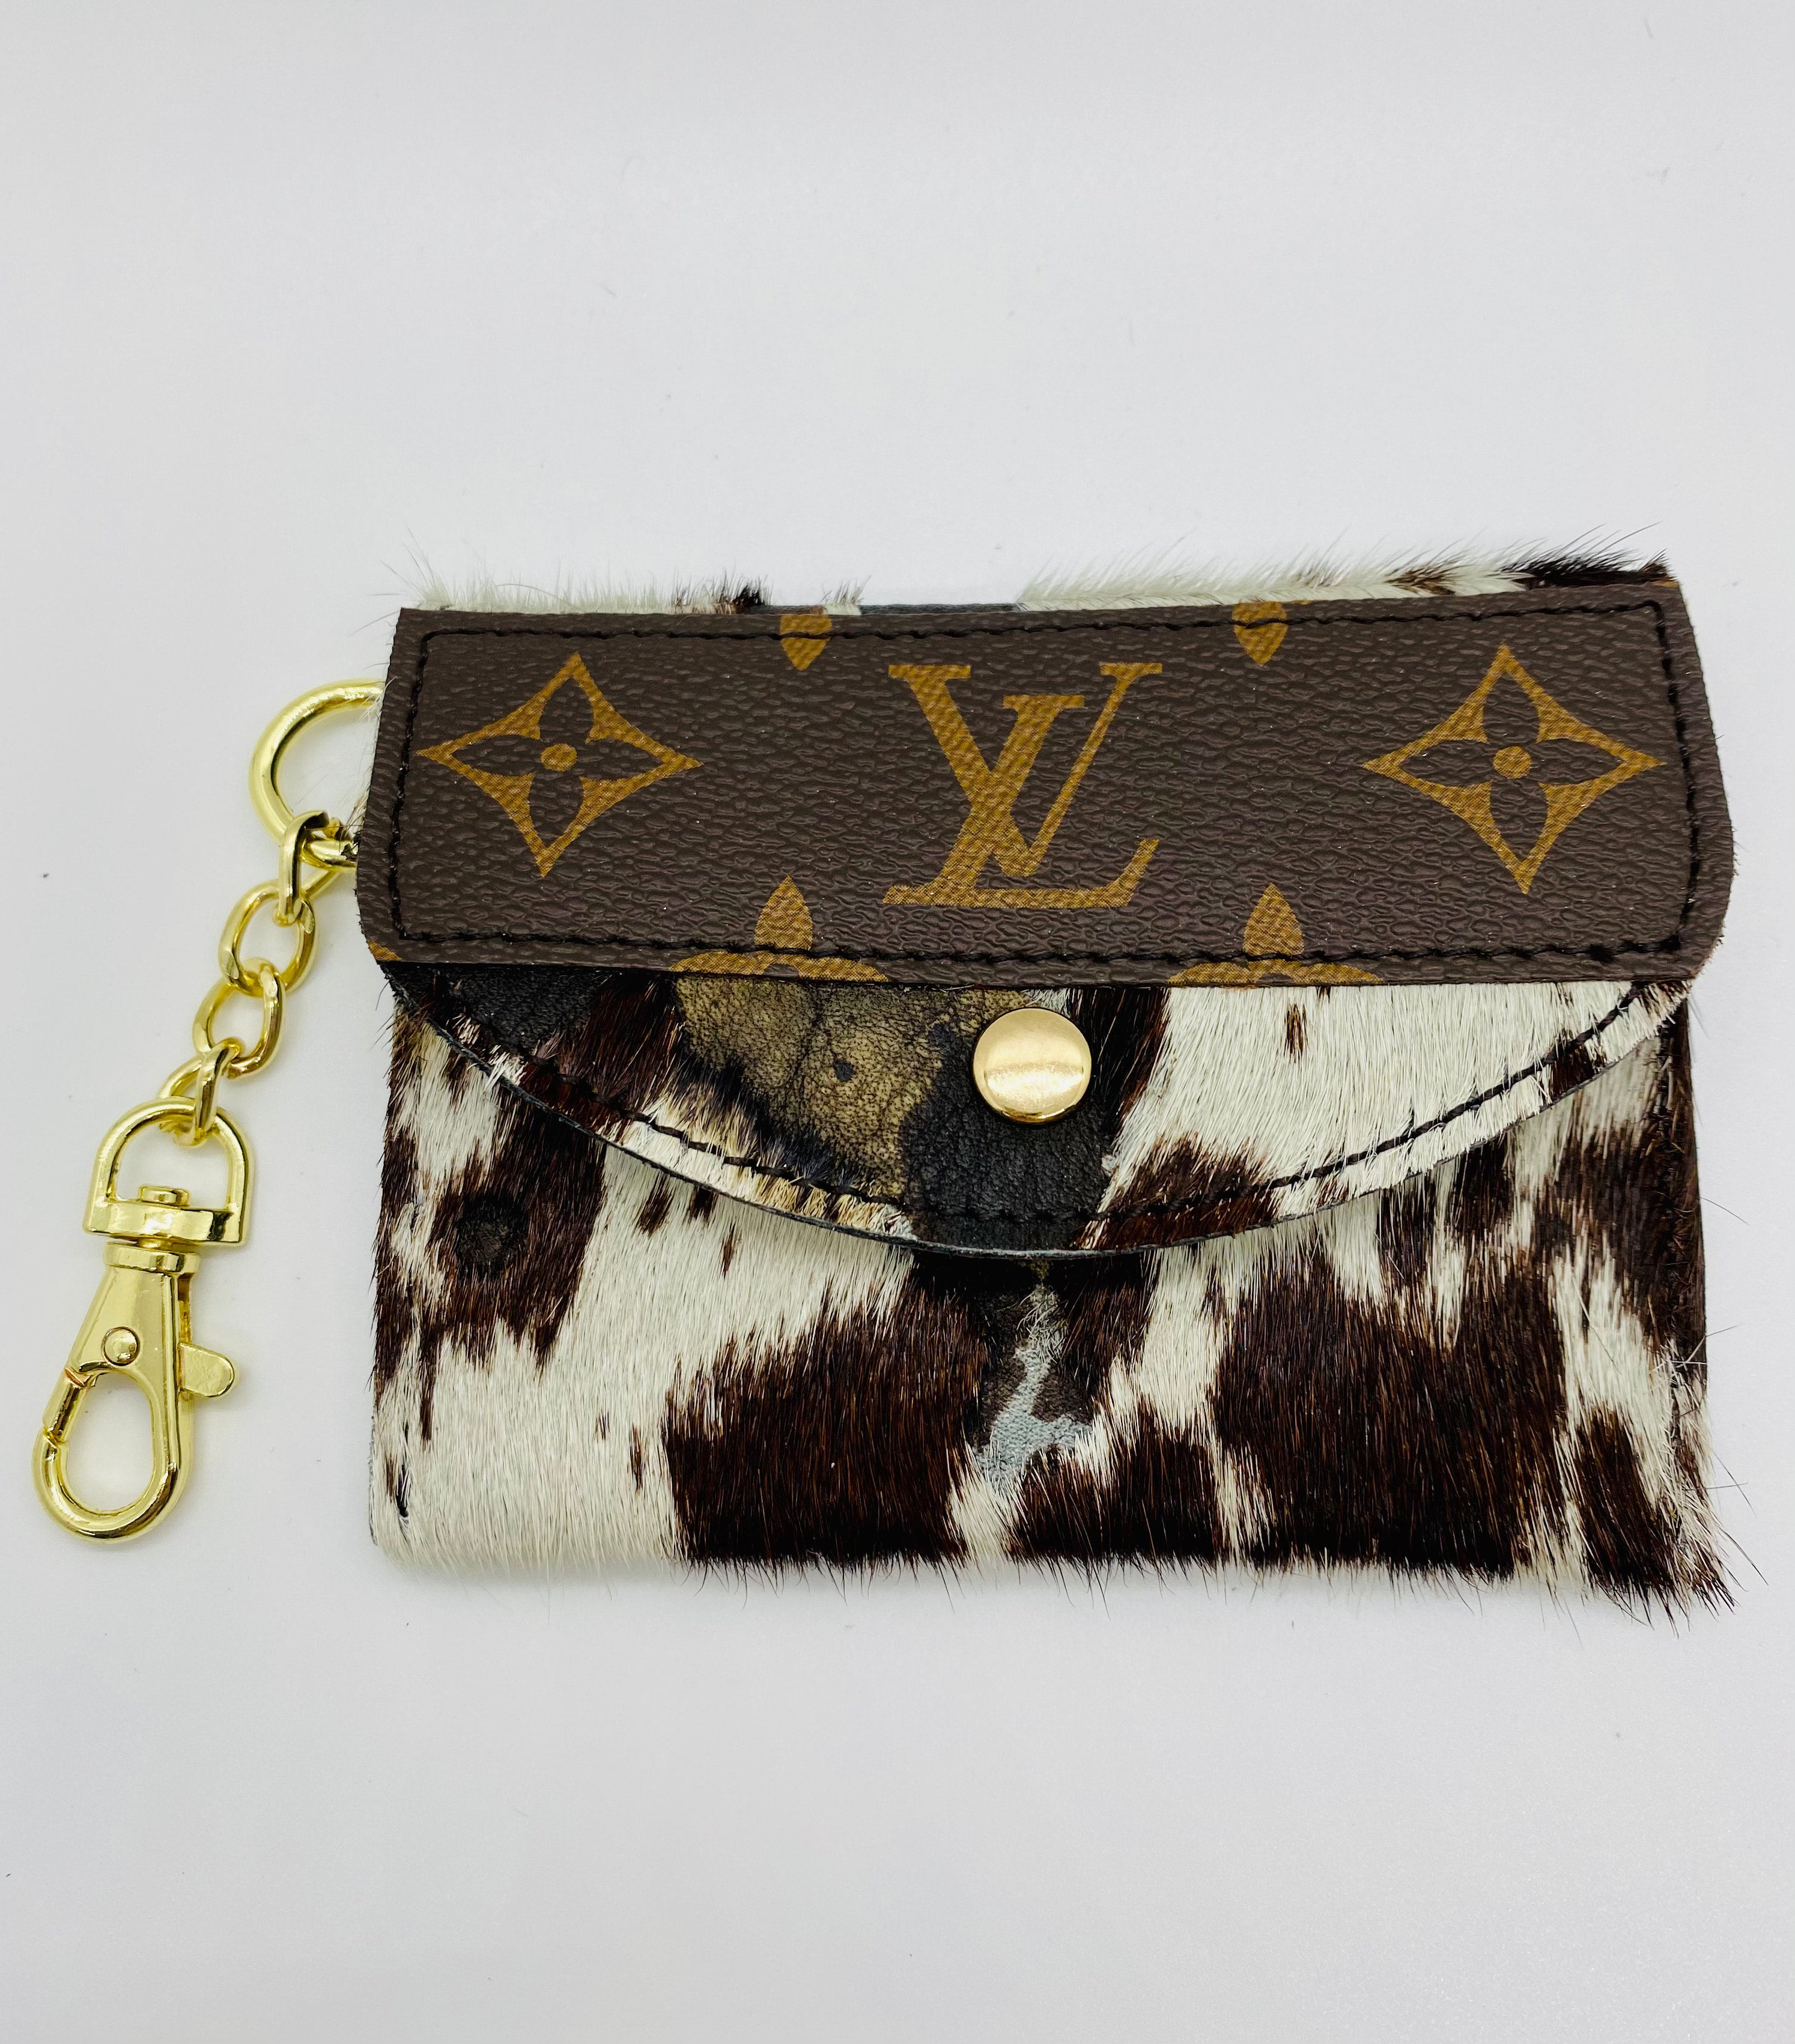 Zippy Coin Purse Monogram - Wallets and Small Leather Goods | LOUIS VUITTON